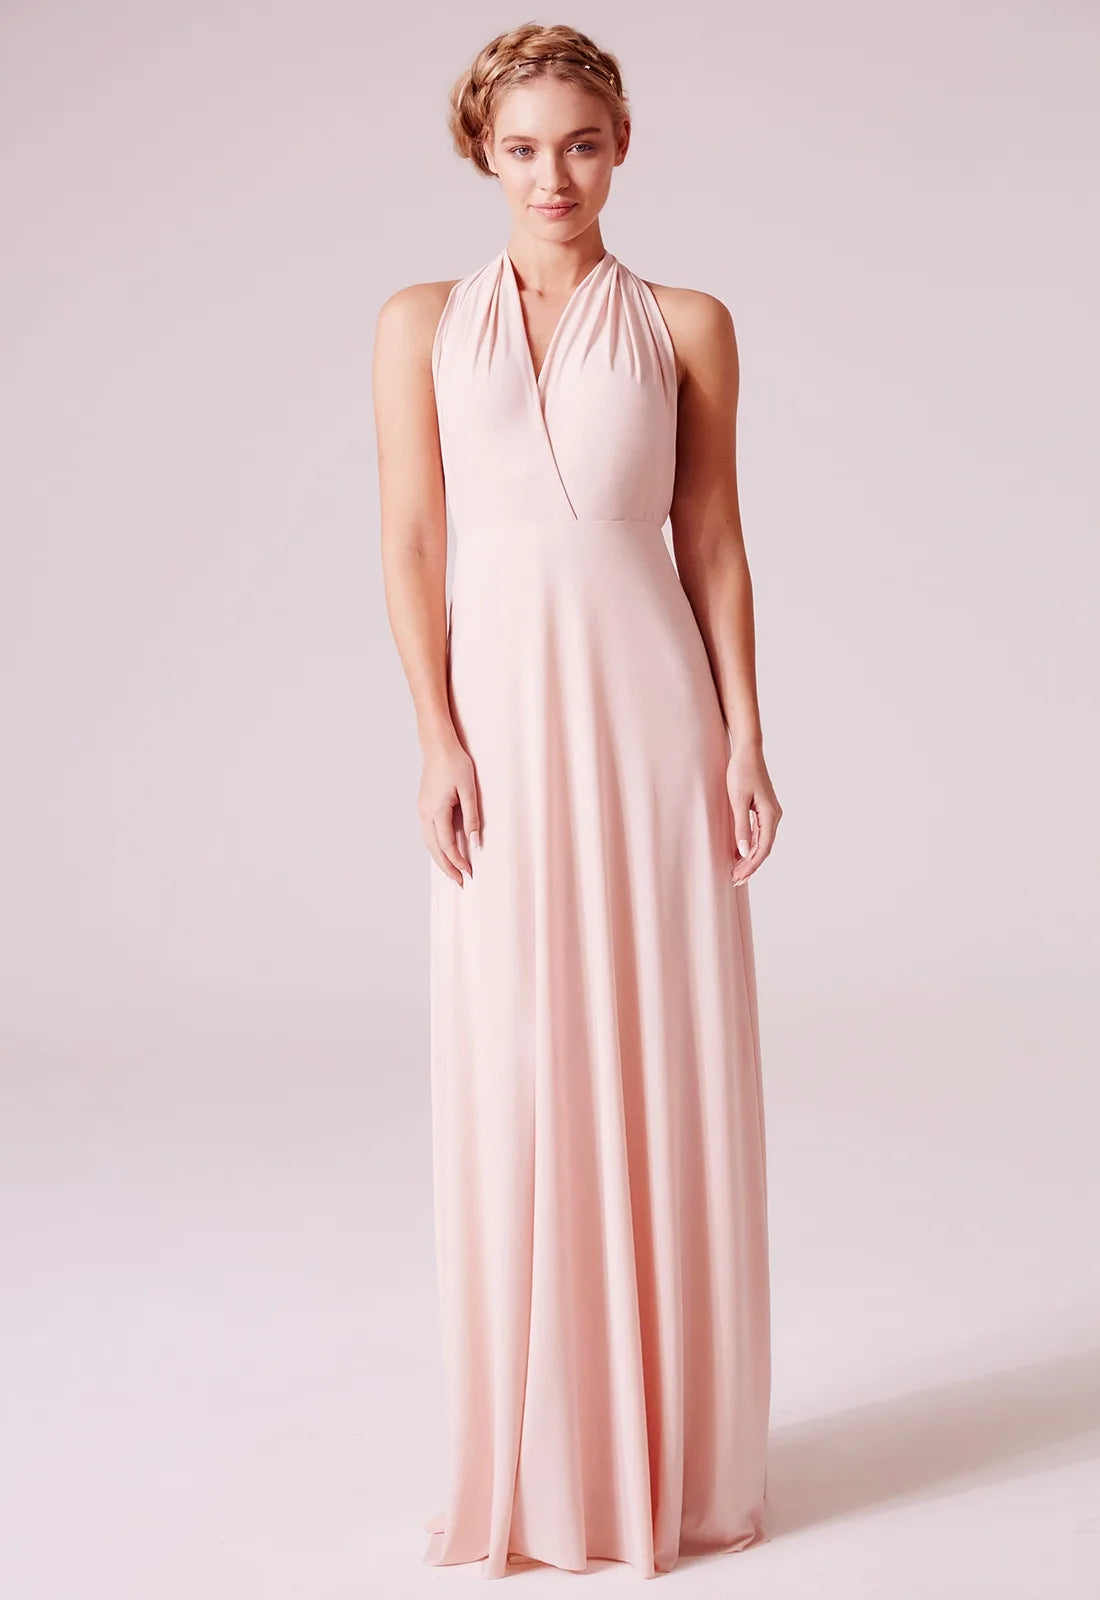 Revie Alexis Multiway Maxi Dress in Nude